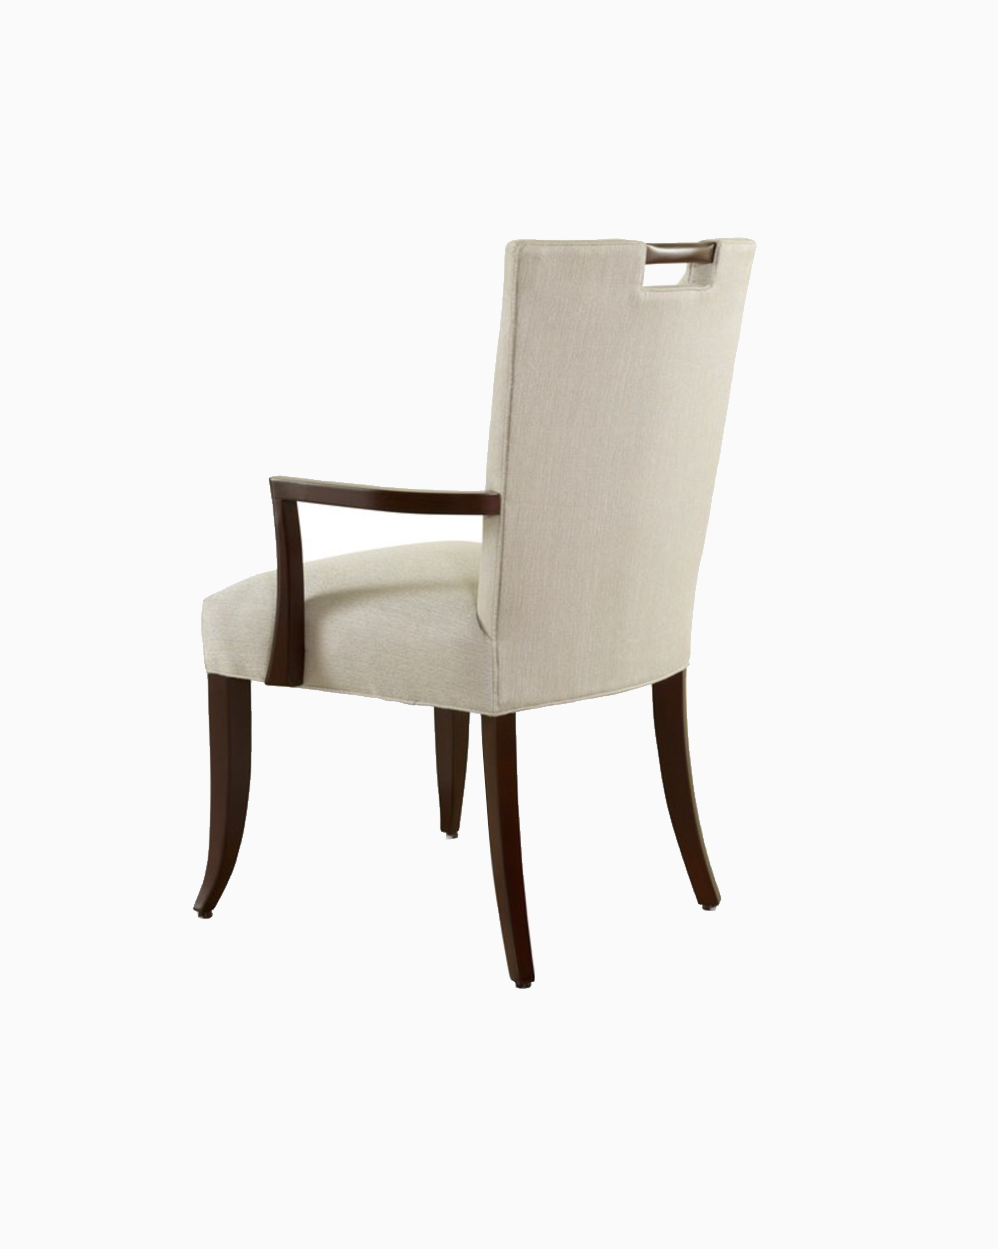 Darby Arm Chair